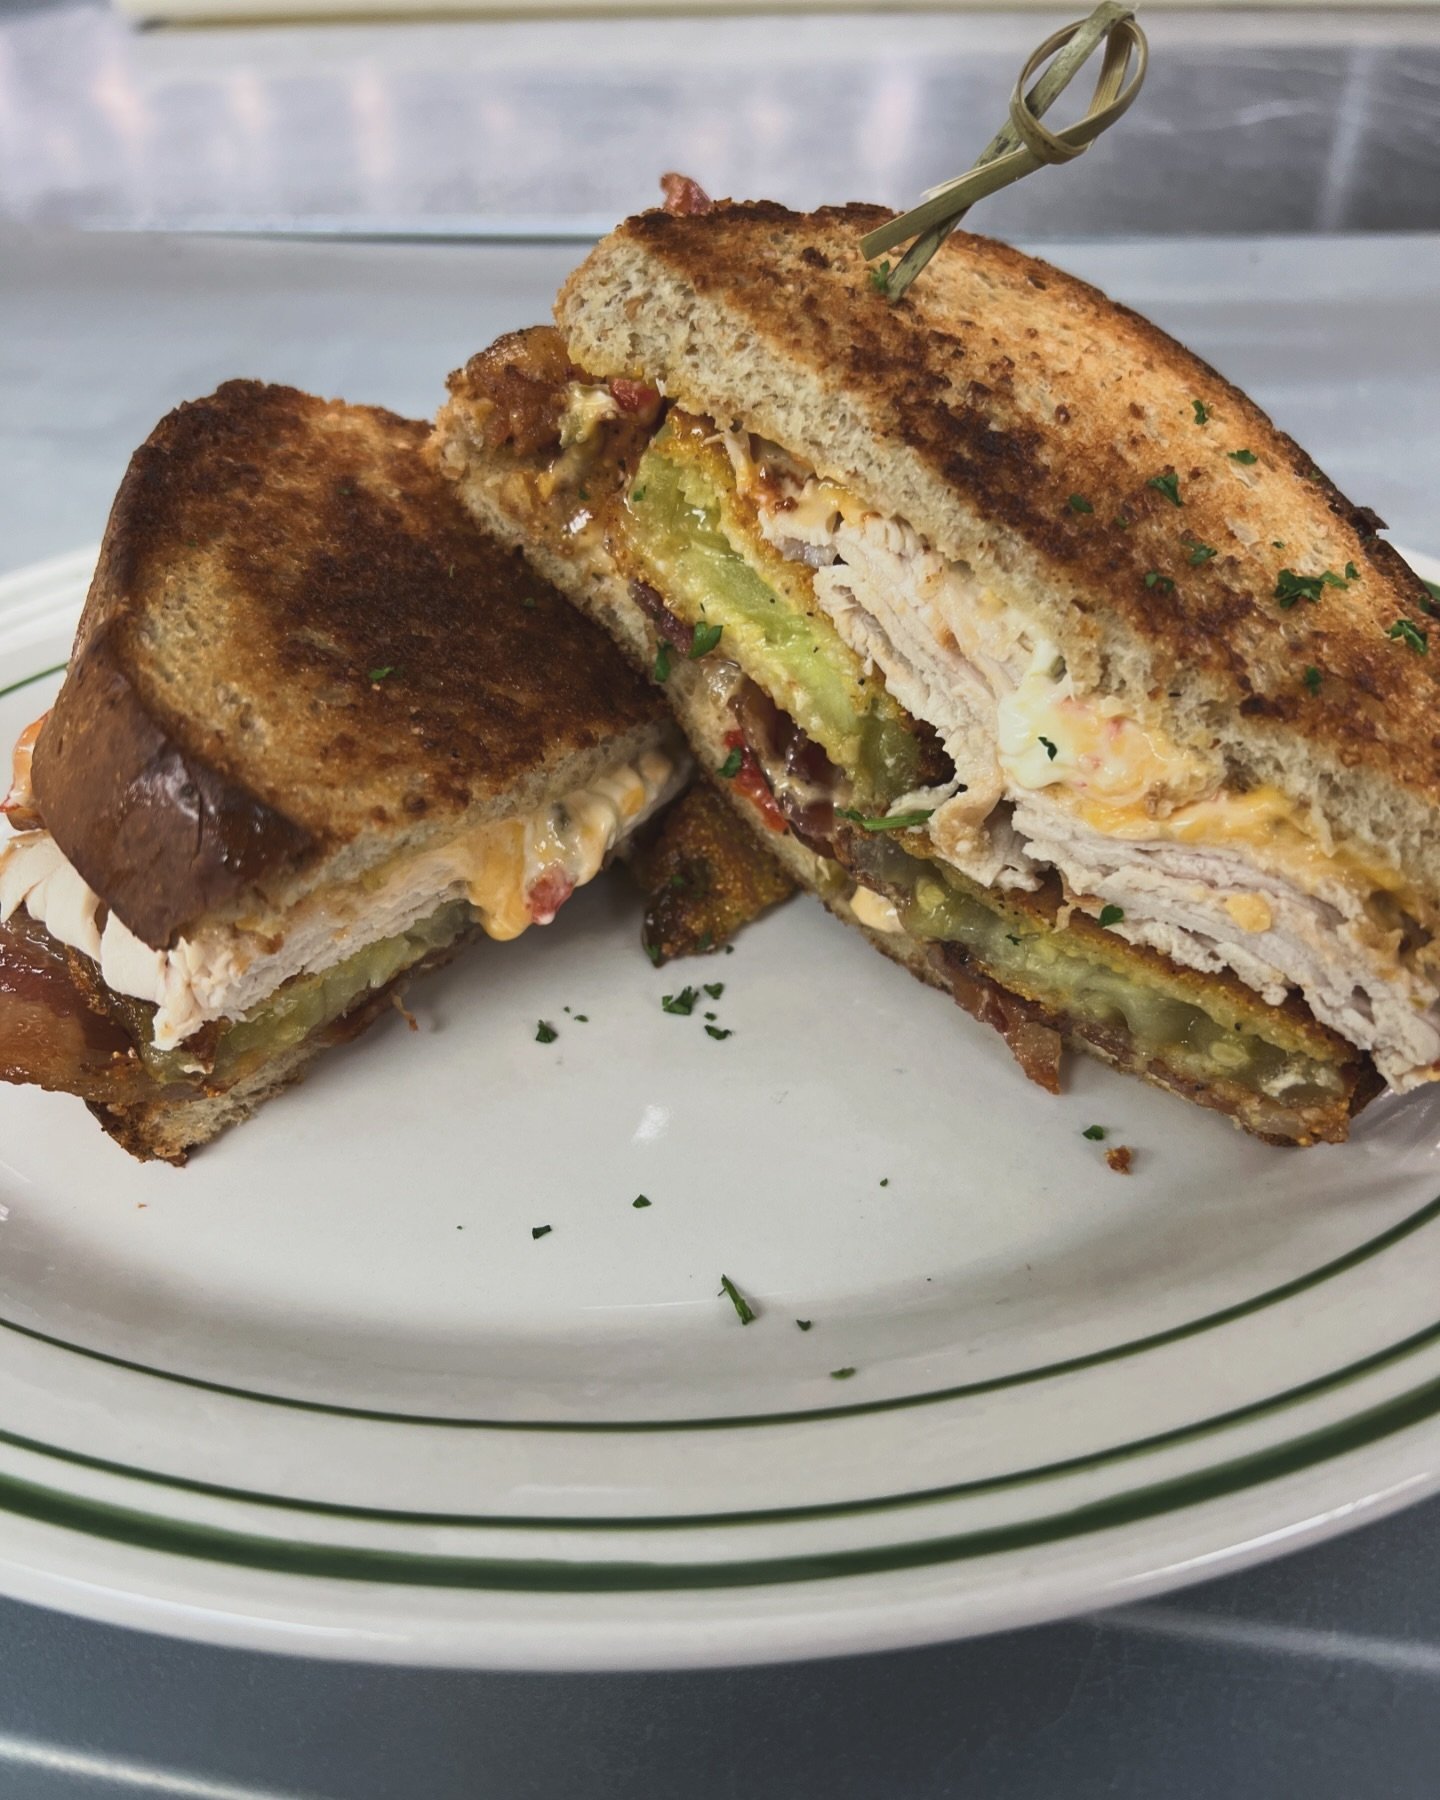 Turkey Melt - shaved turkey, bacon, pimento cheese, fried green tomatoes, wheat berry bread

We are here if you don&rsquo;t feel like cooking tonight. Just sayin&hellip;
&bull;
&bull;
&bull;
&bull;
&bull;
&bull;
#gussies #gussiesraleigh #raleighresta